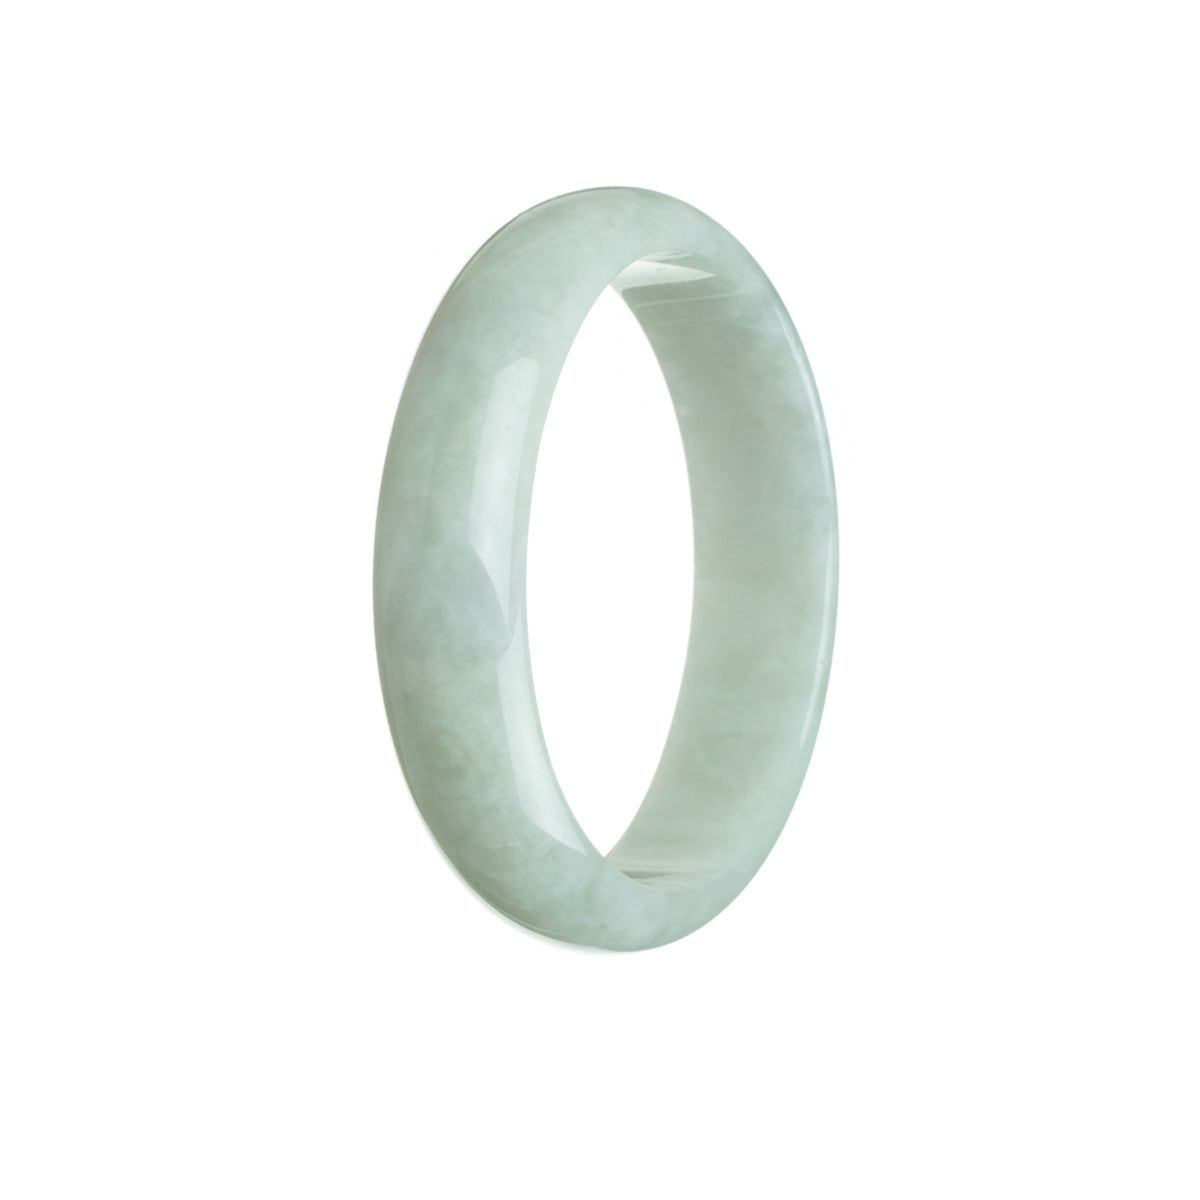 A close-up image of a very pale green jadeite bangle with an oval shape, measuring 56mm in diameter. The bangle is certified as natural and is sold by MAYS.